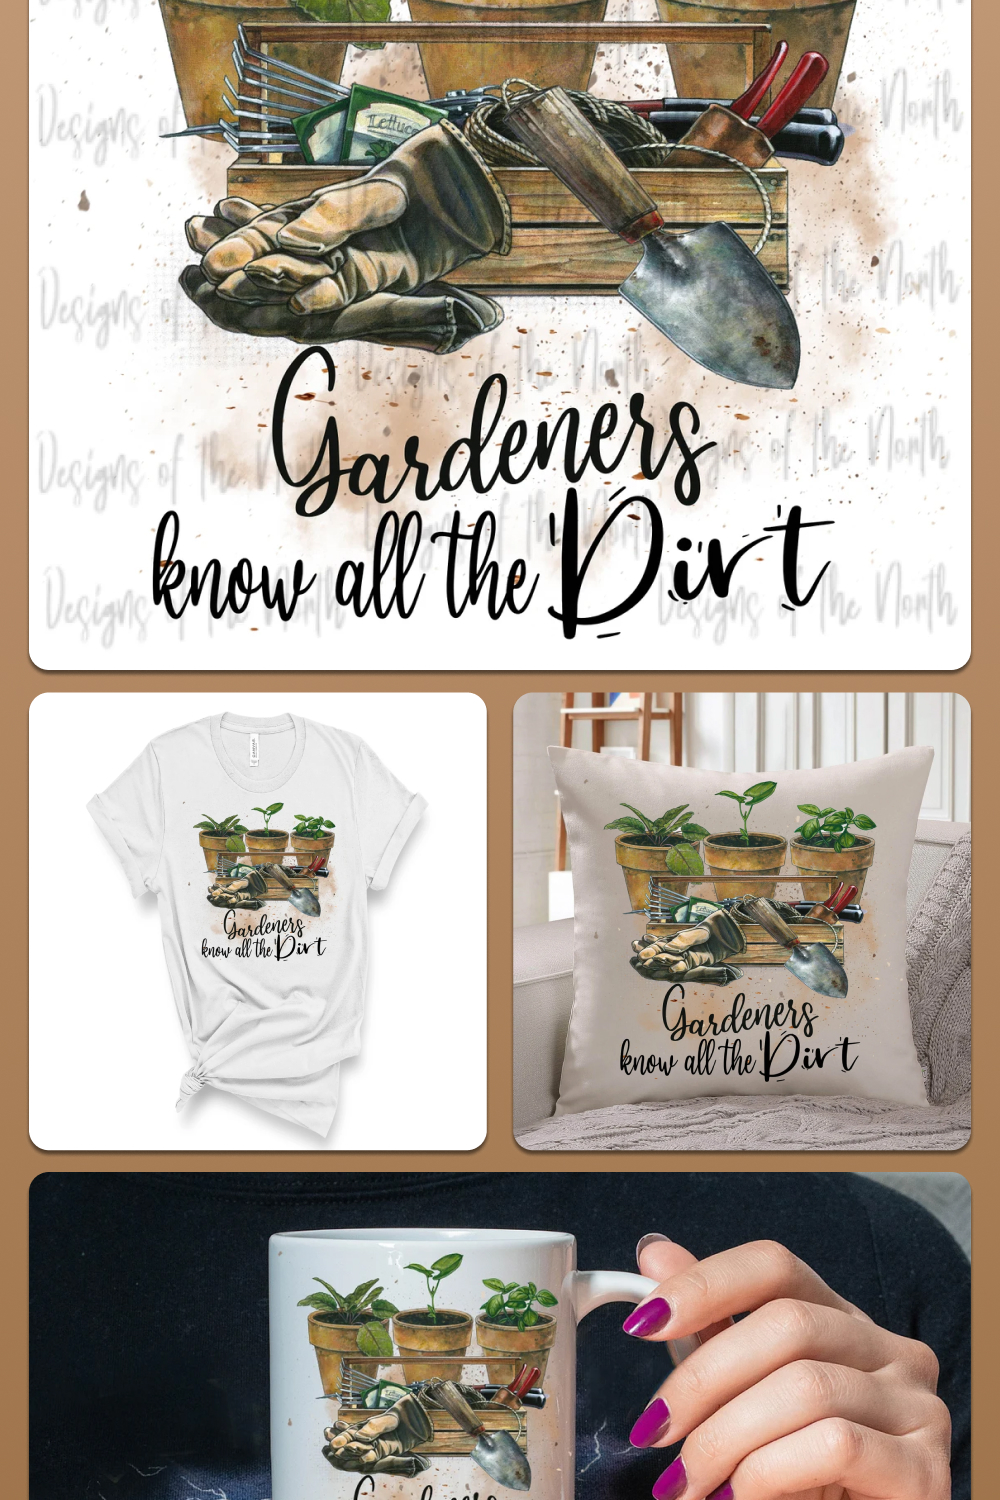 Prints depict gardening as a style.